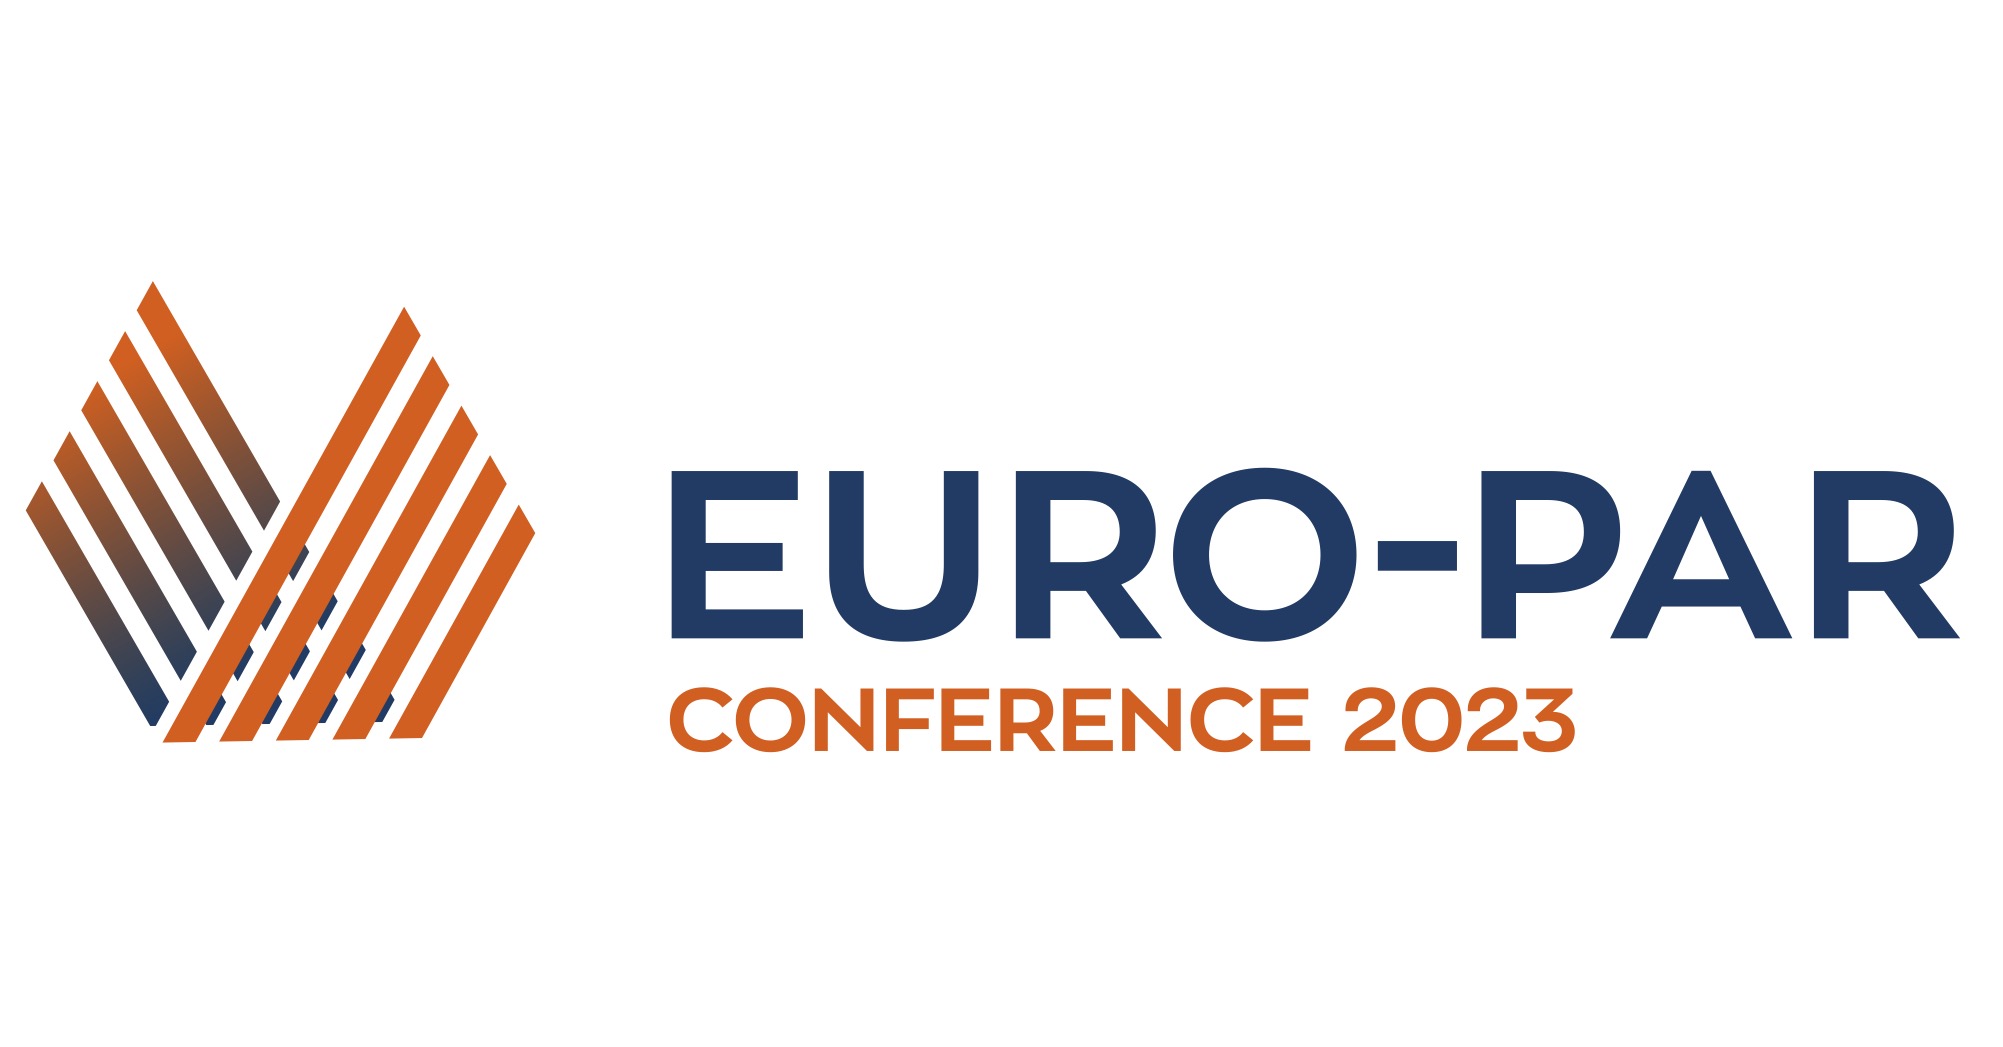 29th International European Conference on Parallel and Distributed Computing (Euro-Par 2023)